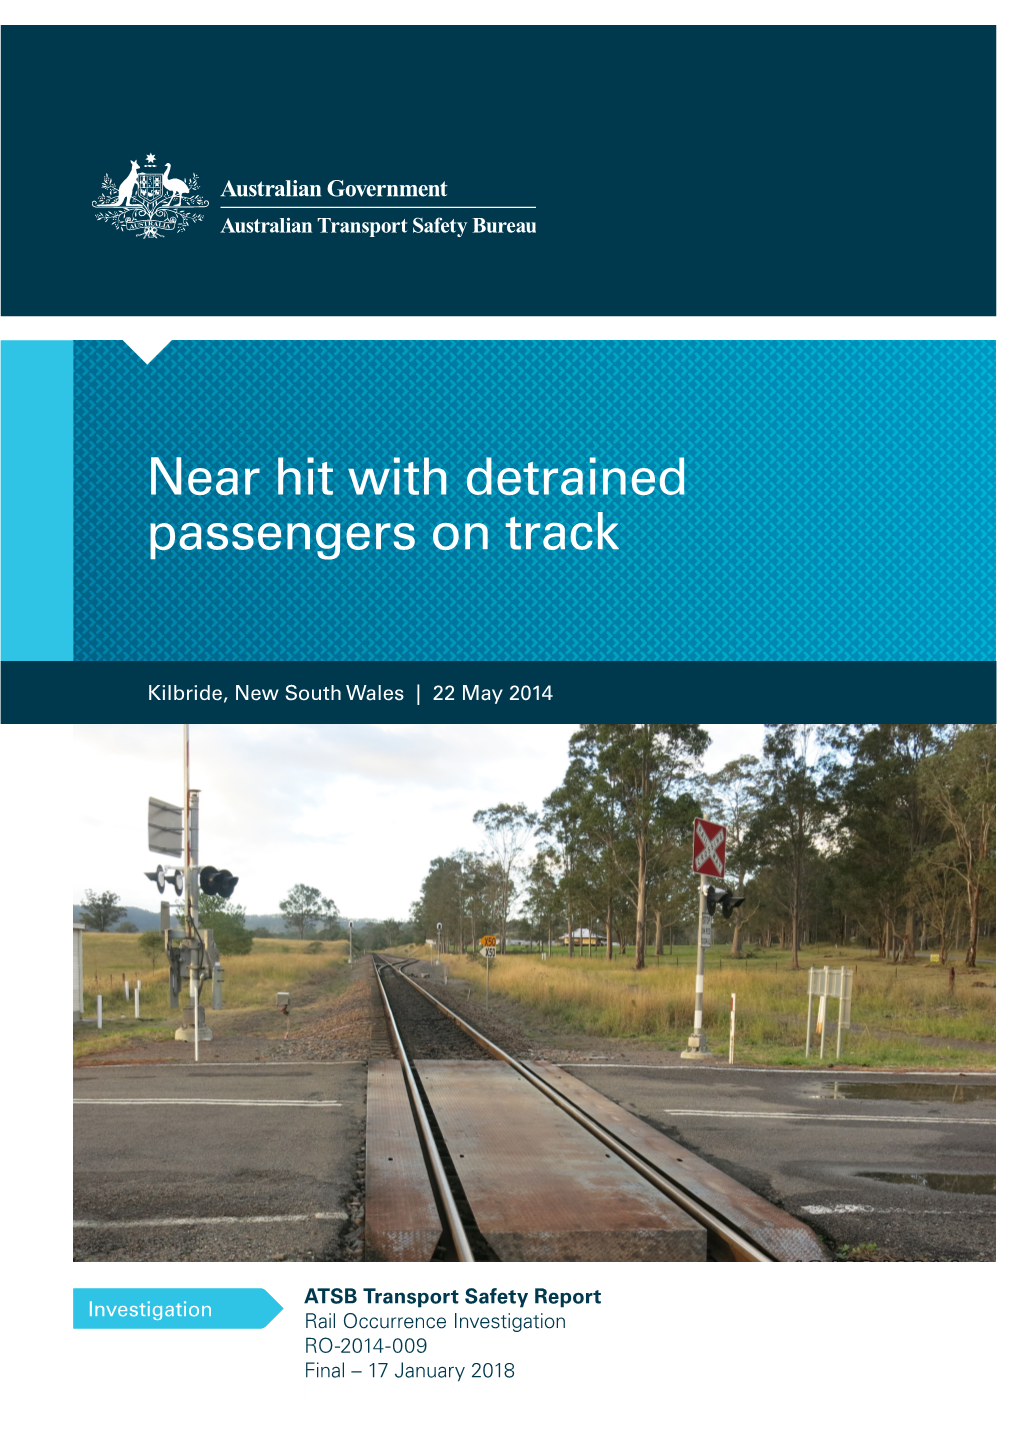 Near Hit with Detrained Passengers on Track, Kilbride, New South Wales, on 22 May 2014